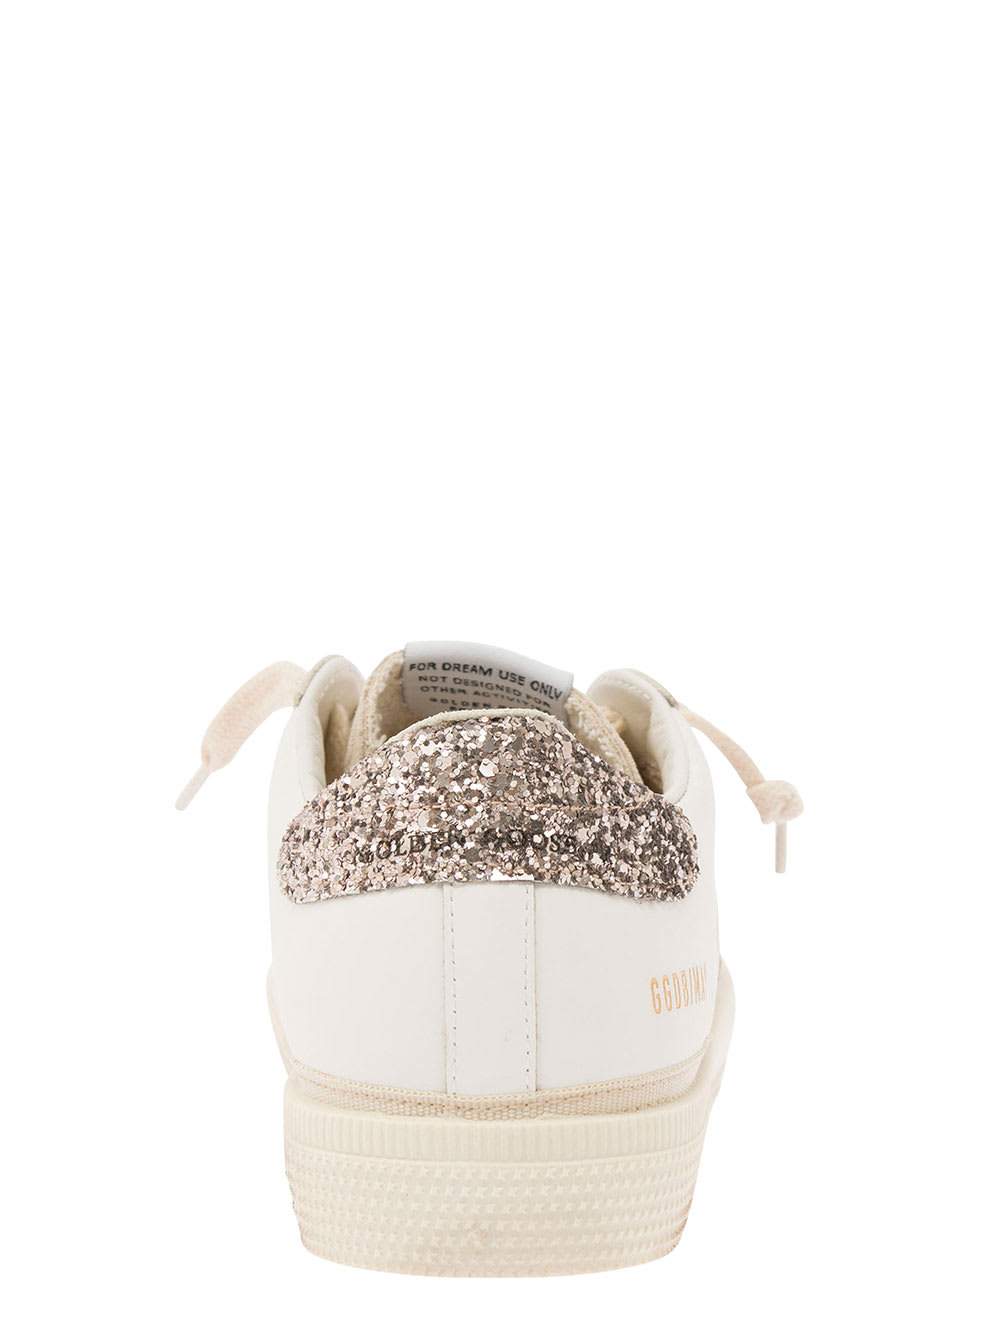 Shop Golden Goose May Leather And Glitter Upper Suede Star Glitter Heel Include Stesso Codice Gyf In White Cinder Seed